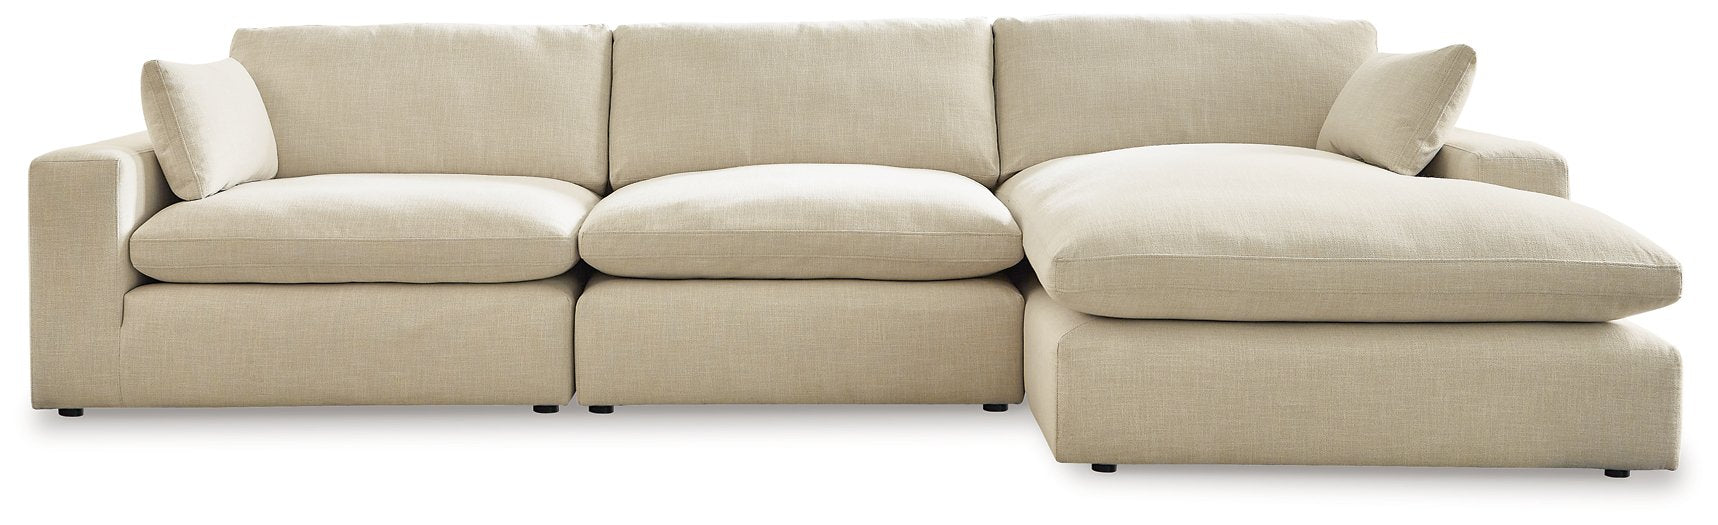 Elyza 3-Piece Sectional with Chaise image